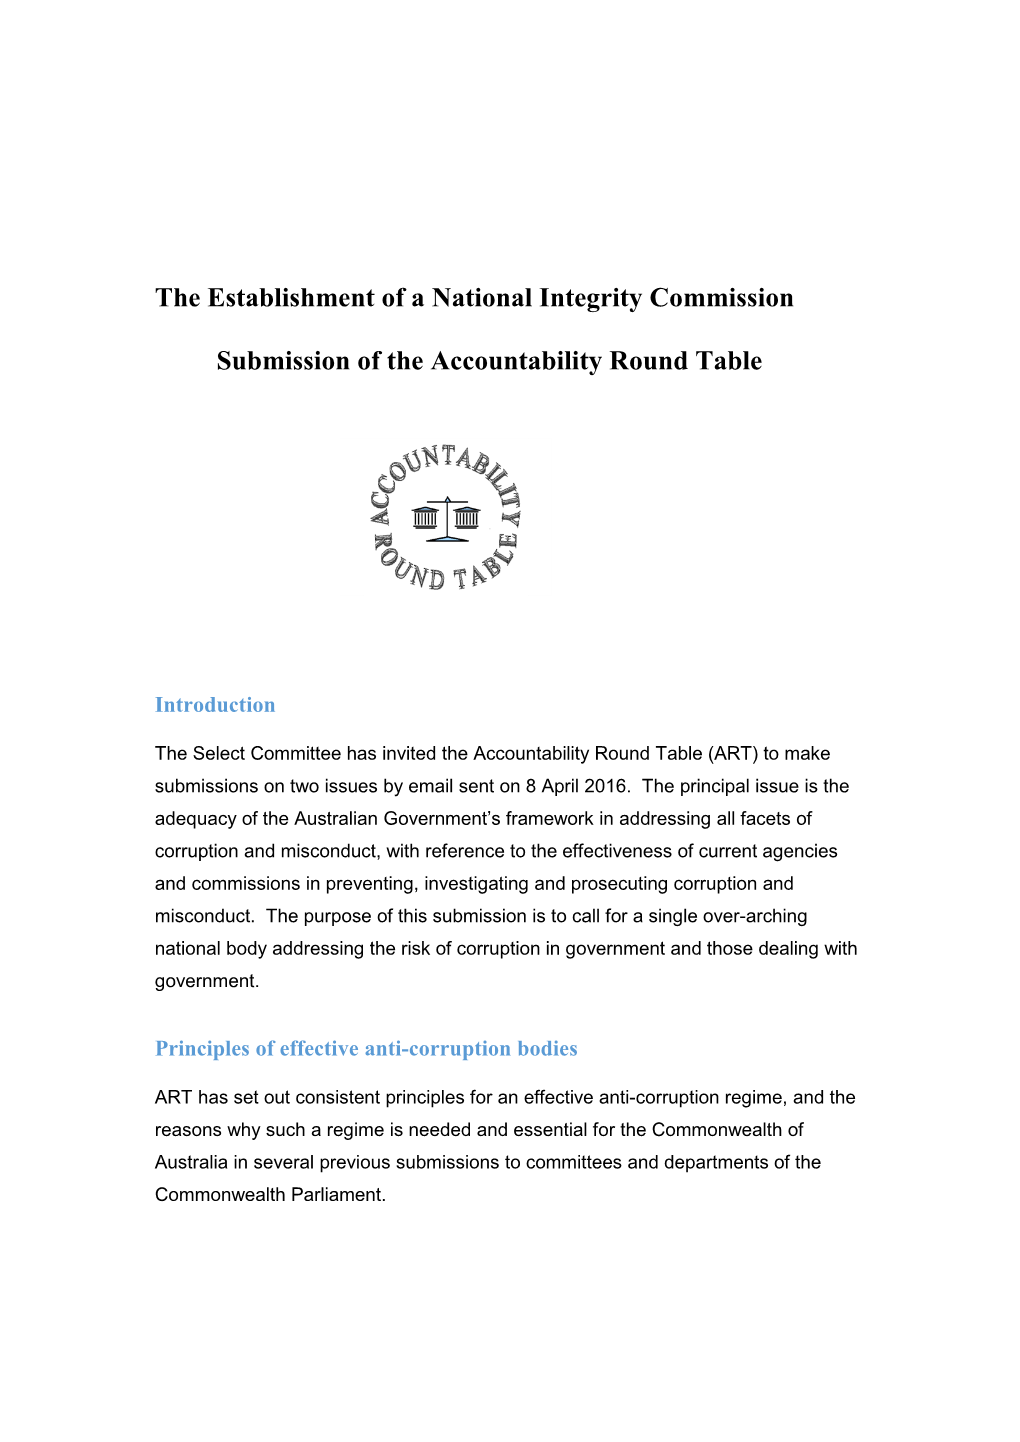 The Establishment of a National Integrity Commission Submission Of